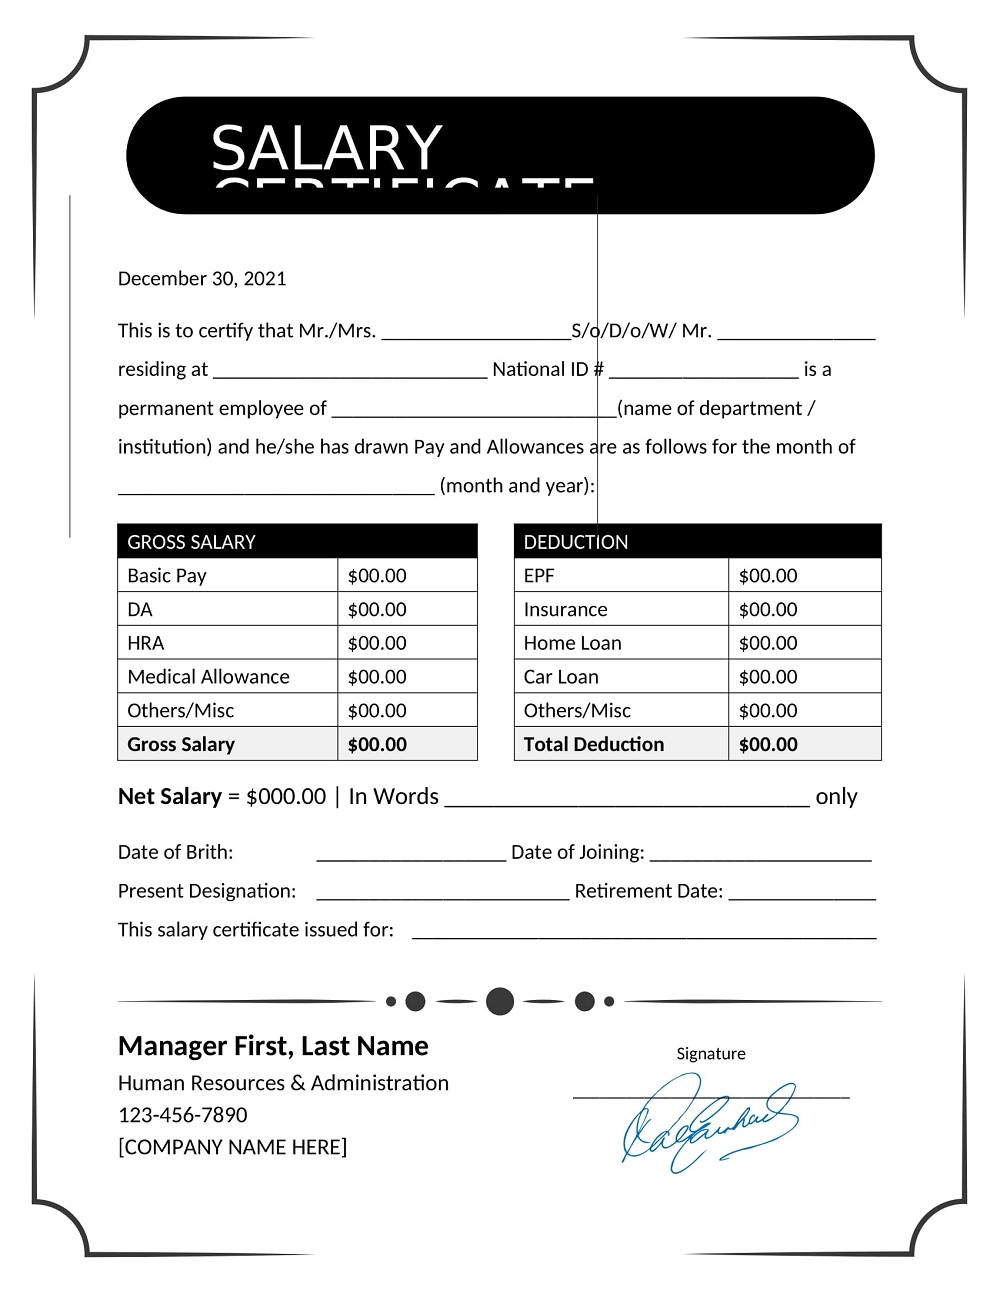 Salary Certificate Format with Gross and Deduction Amounts